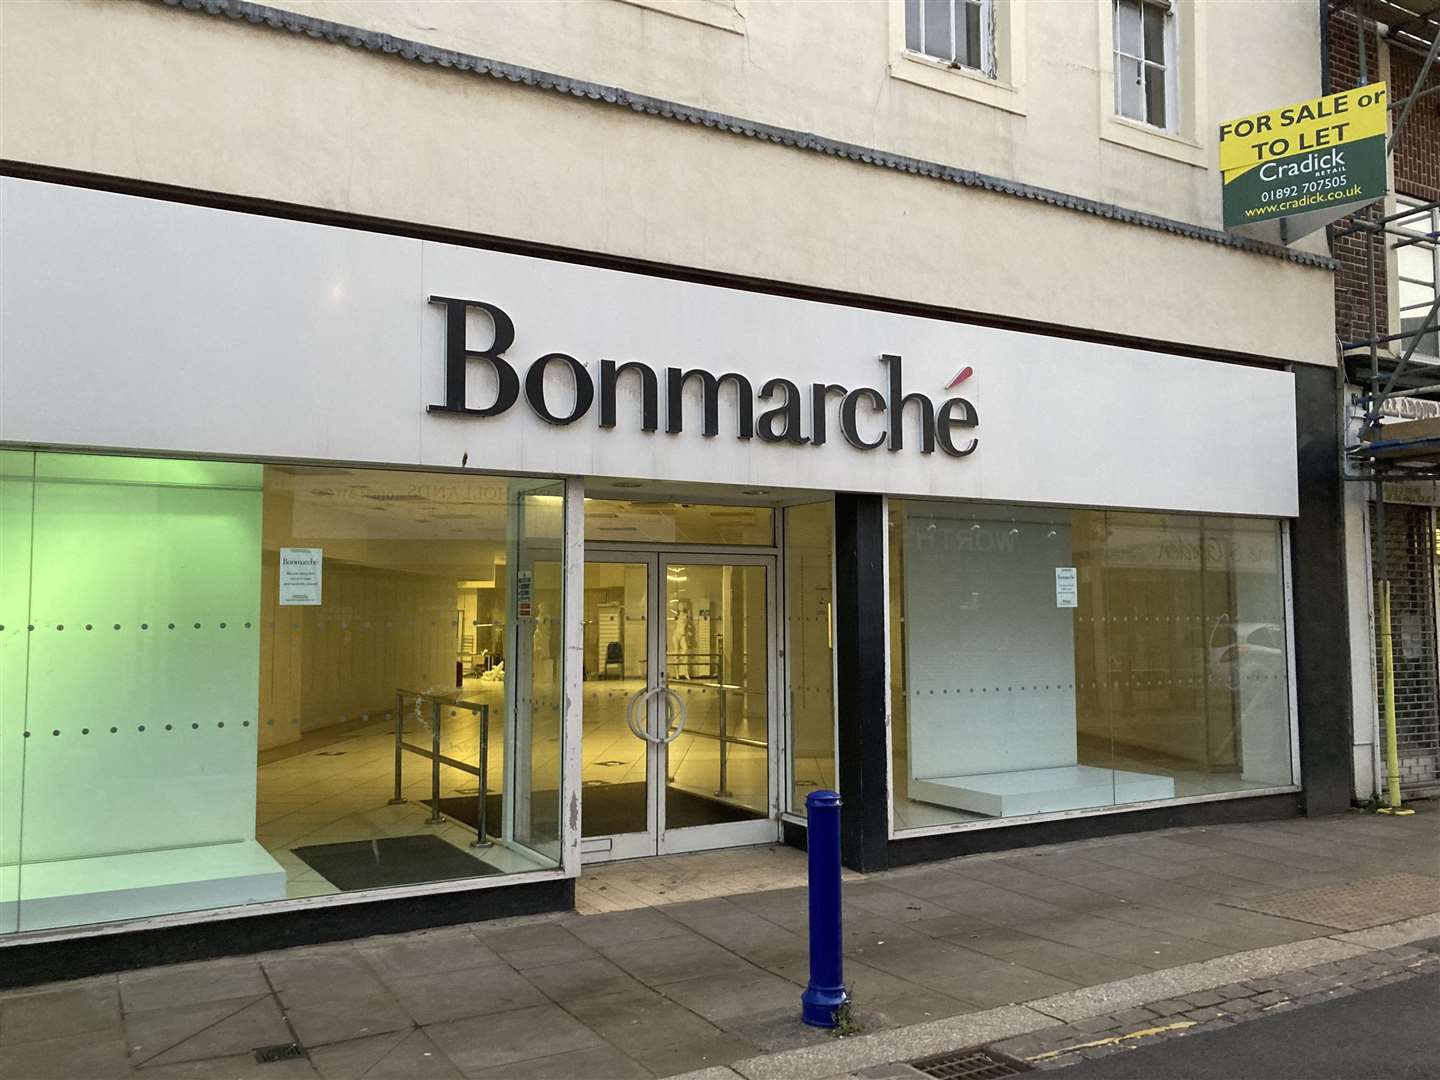 New owners want to convert the upper floors of the empty Bonmarche shop in Sheerness High Street into self-contained flats